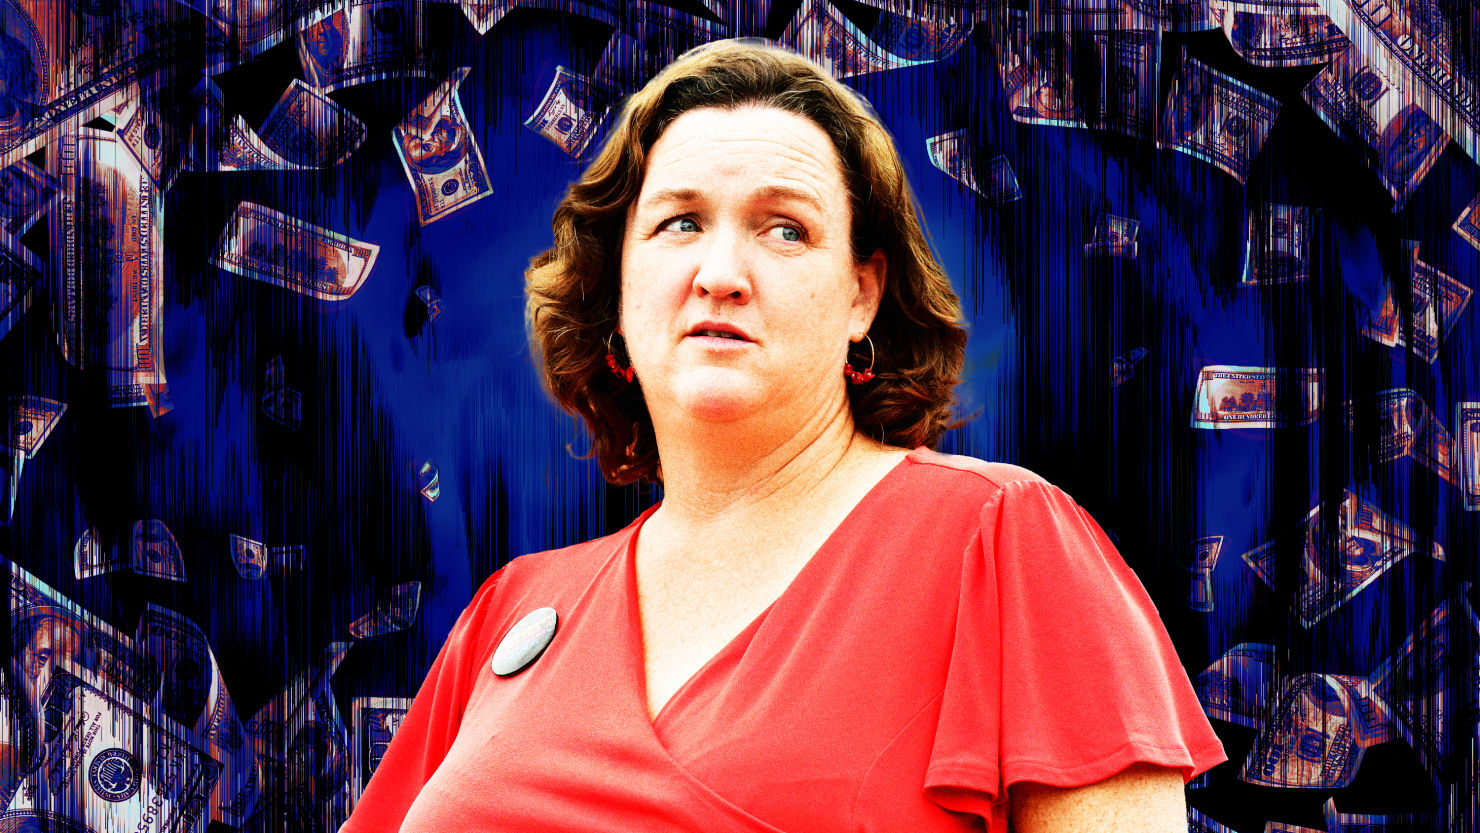 Katie Porter Touts Clean Campaign Cash. Her Record Isn’t So Spotless.